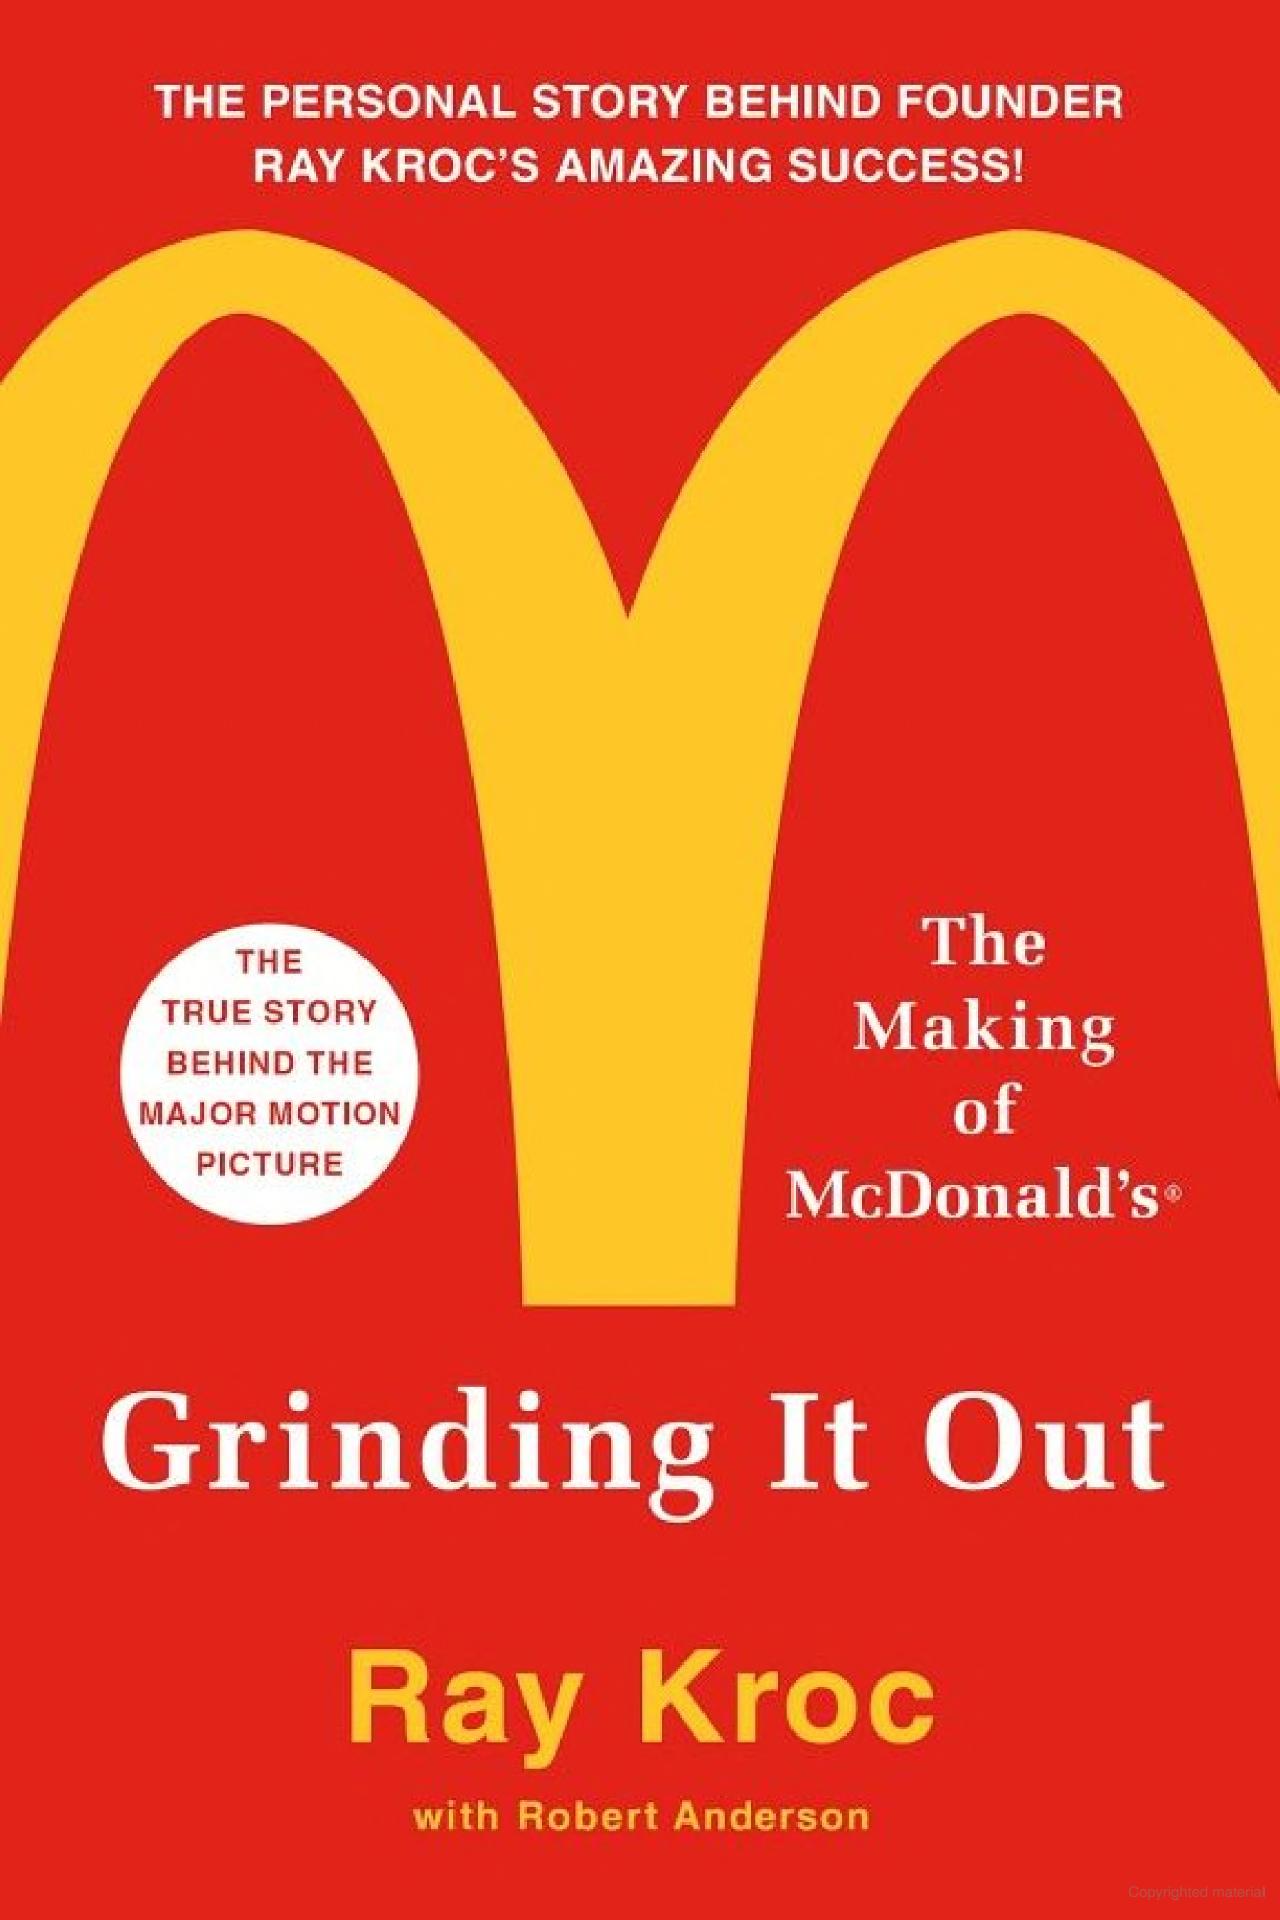 Grinding it out- The Making of McDonald’s by Ray Kroc